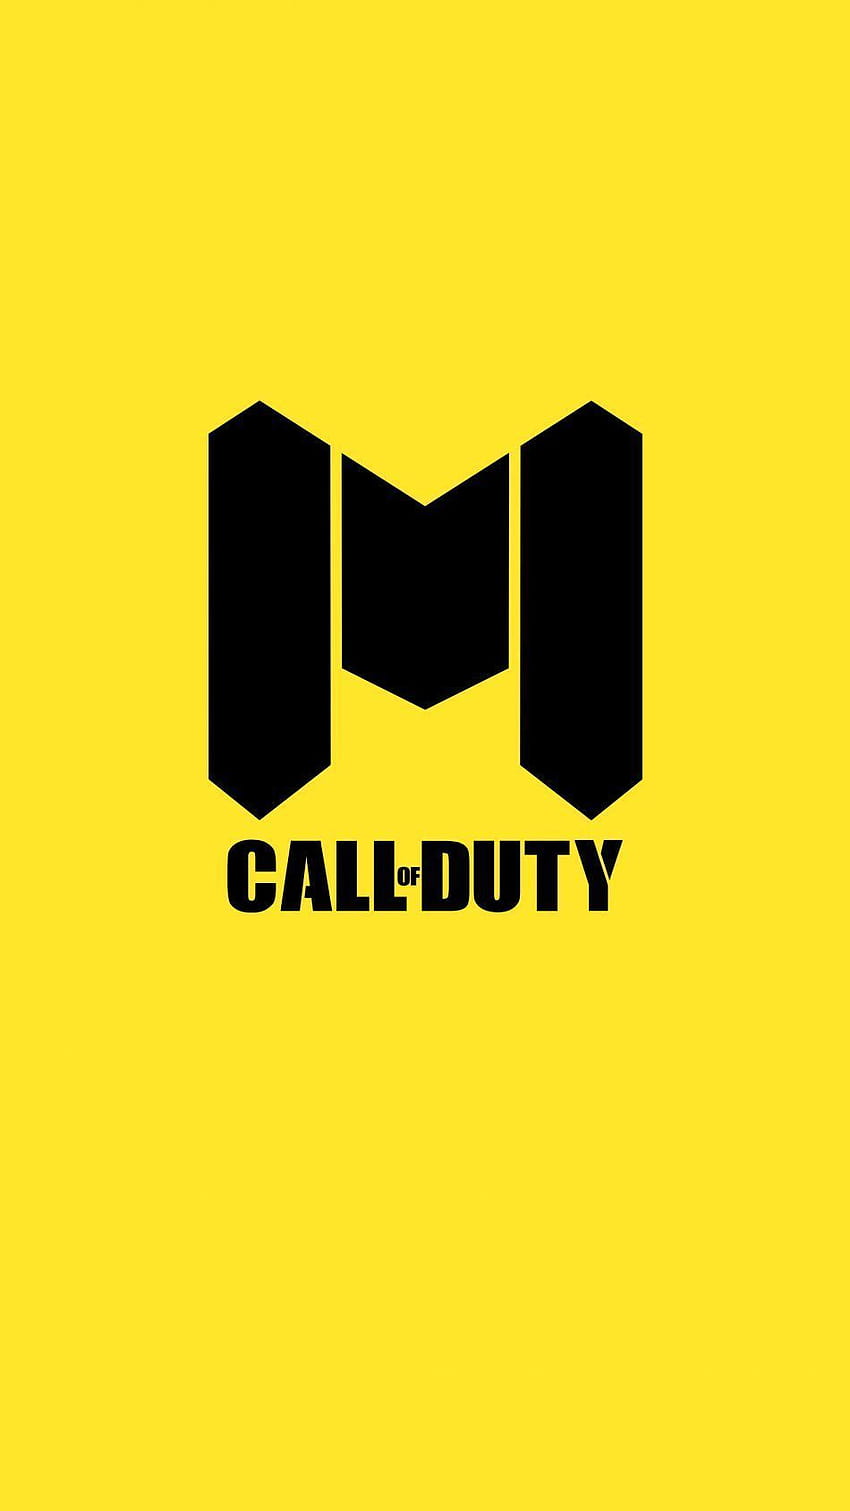 Call of Duty Mobile Logo Yellow Backgrounds 2020, codm wallpaper ponsel HD